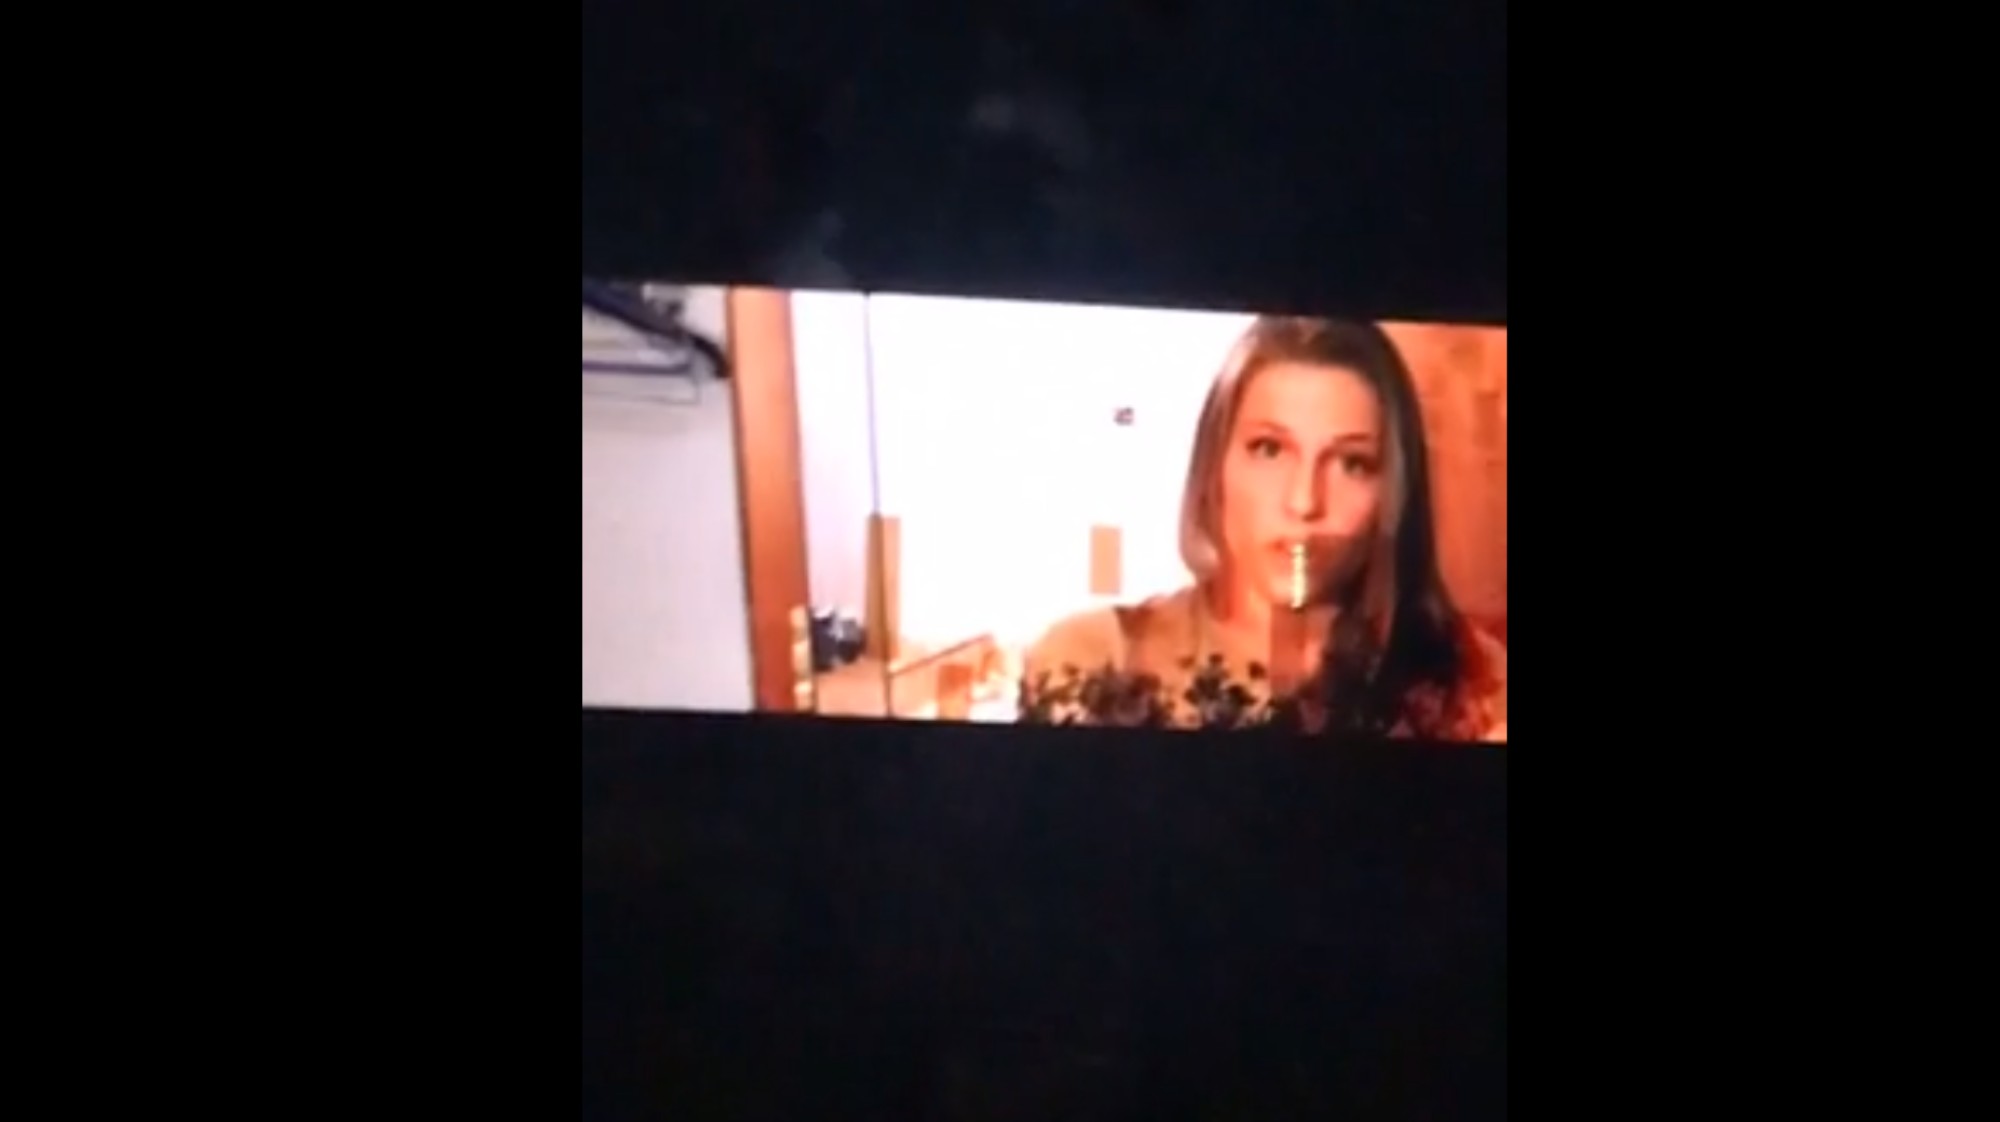 Blowjob While High - Threesome Blowjob Scene on Giant Highway Billboard Could ...